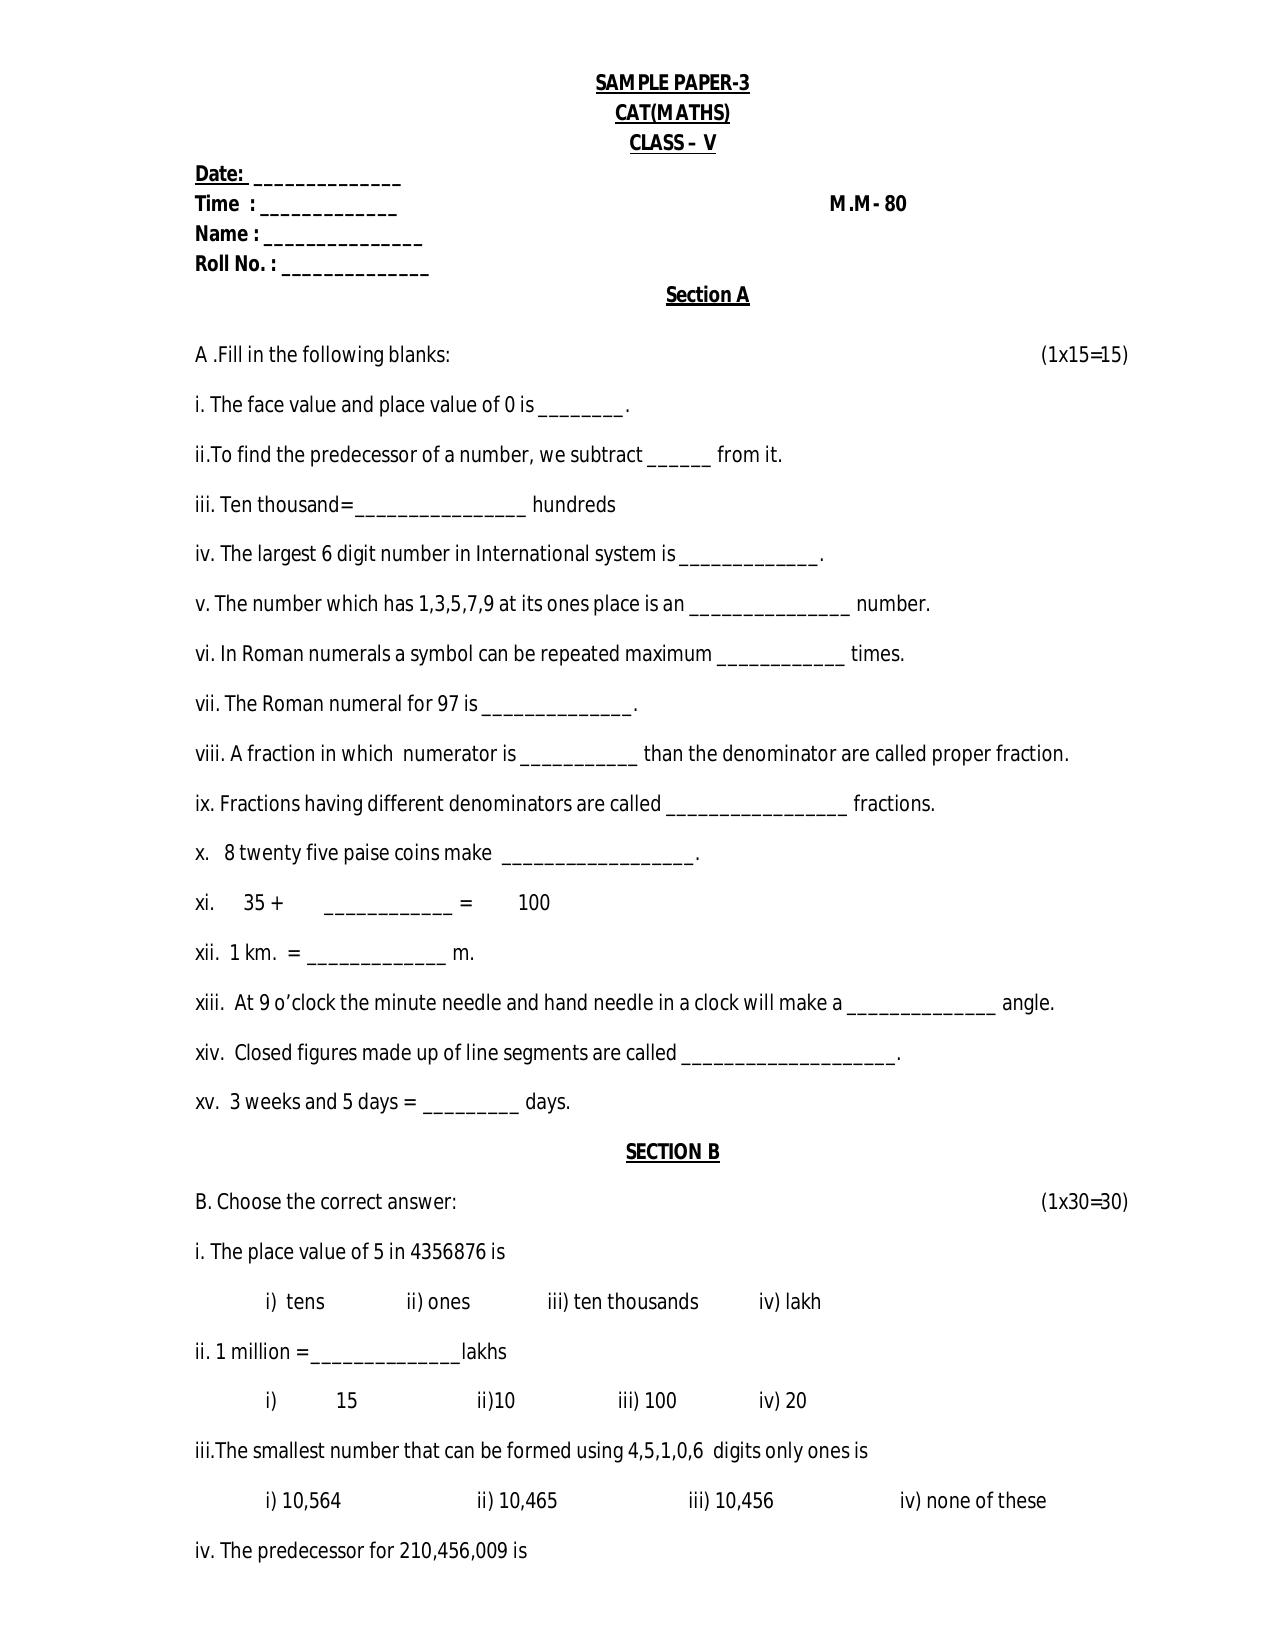 Worksheet for Class 5 Maths Assignment 15 - Page 1